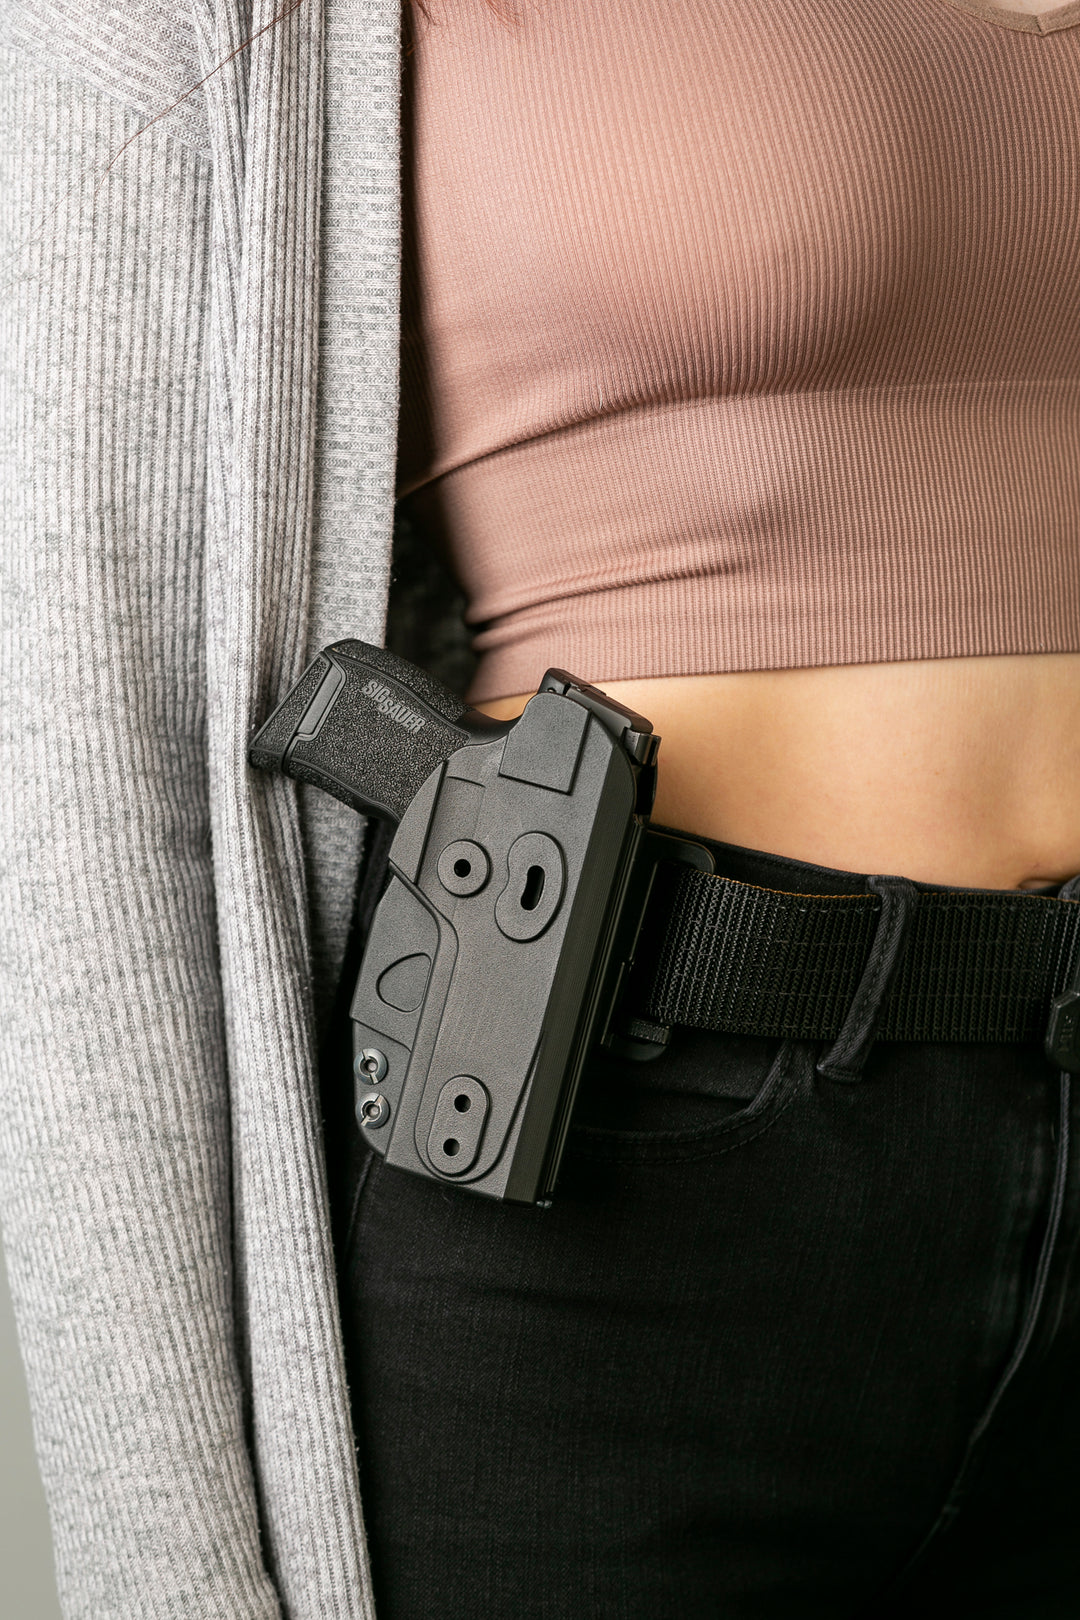 Sig P320 Carry Holster: CCW Holster for your Sig P320 Carry